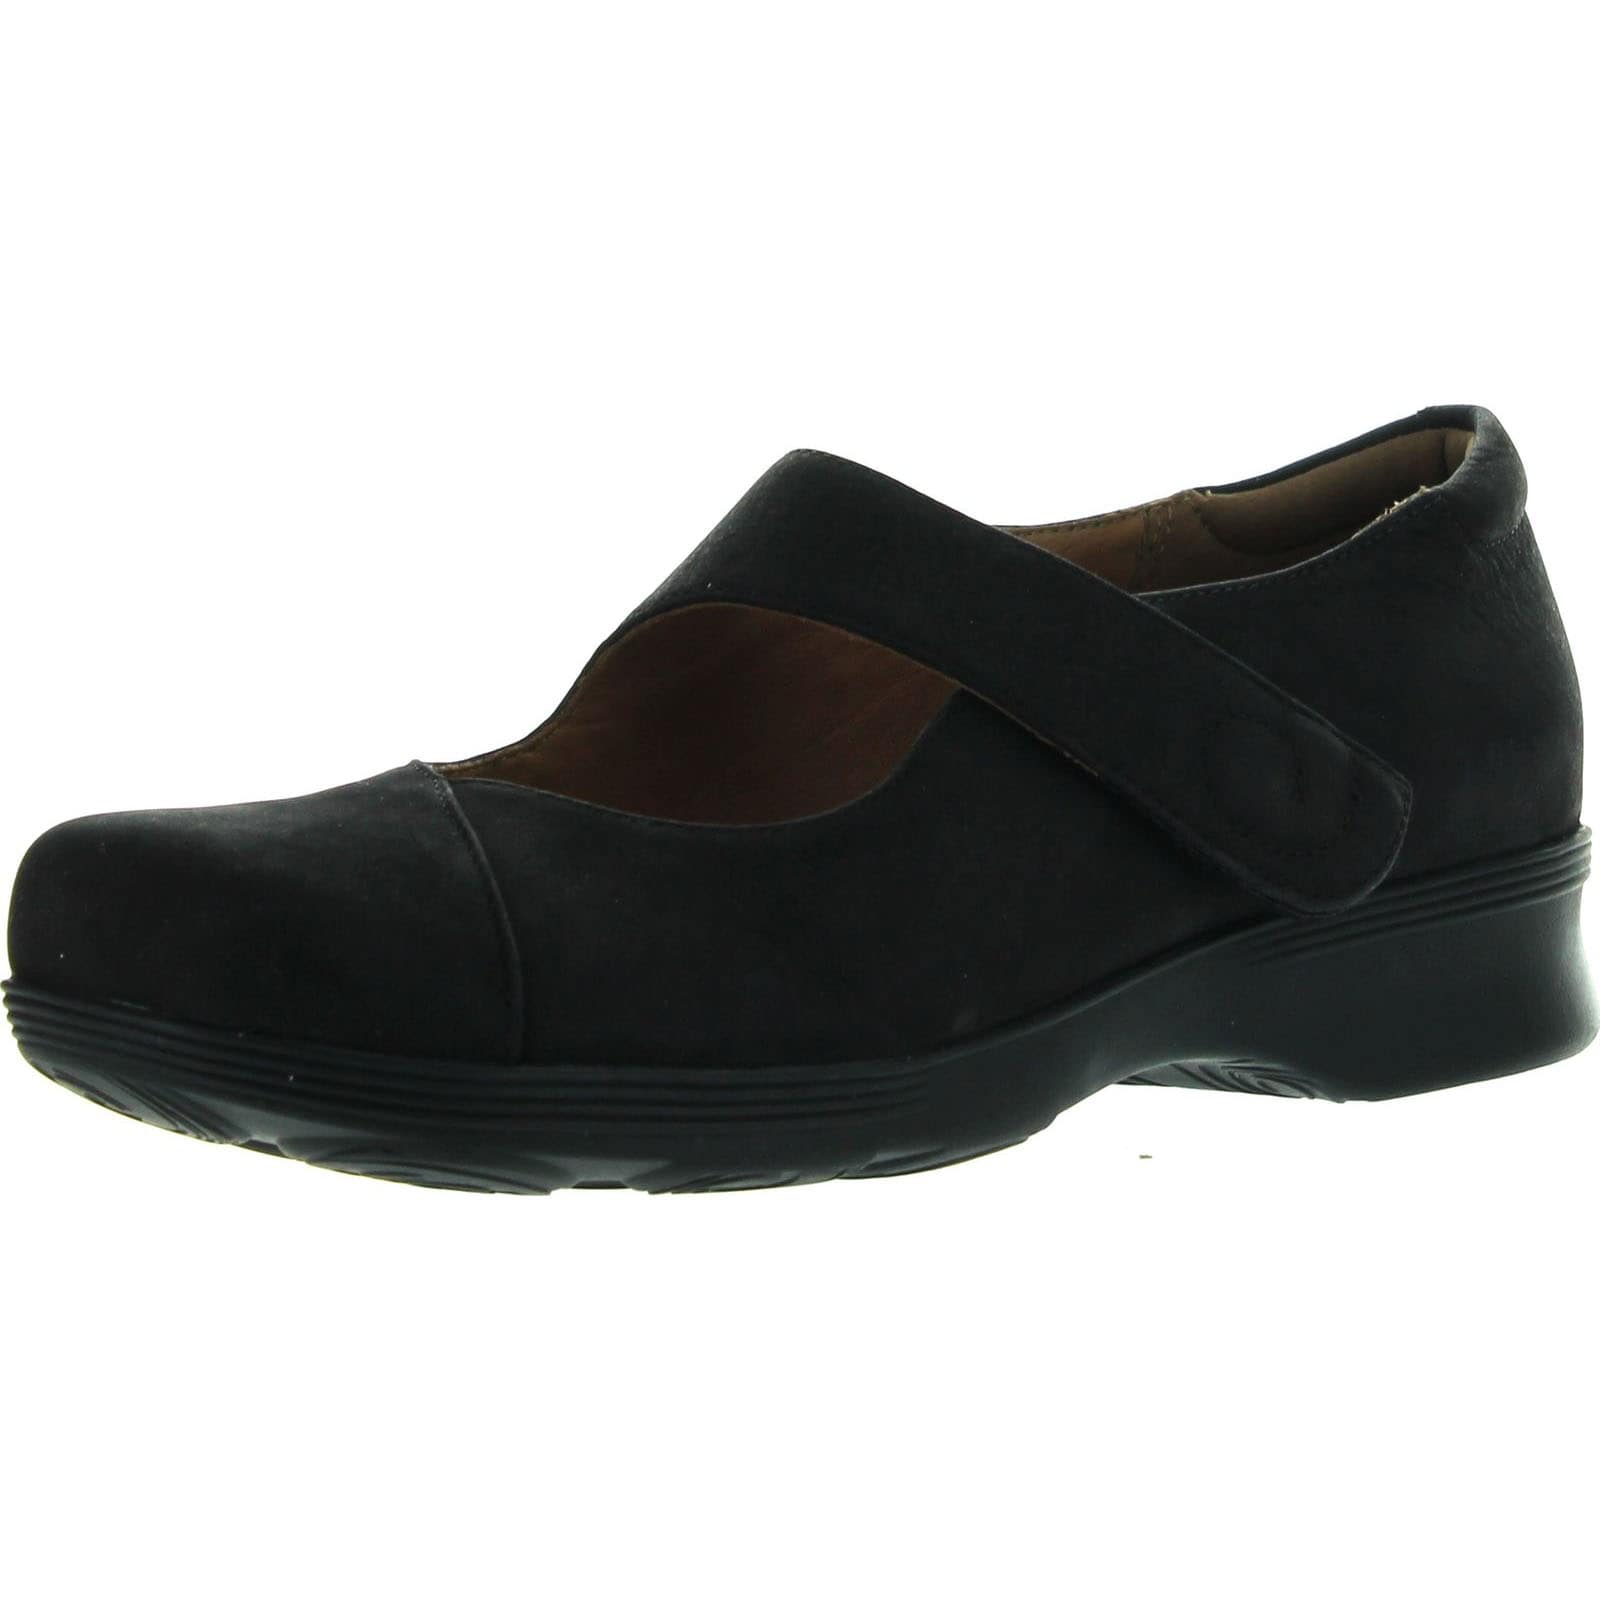 clarks womens flat shoes